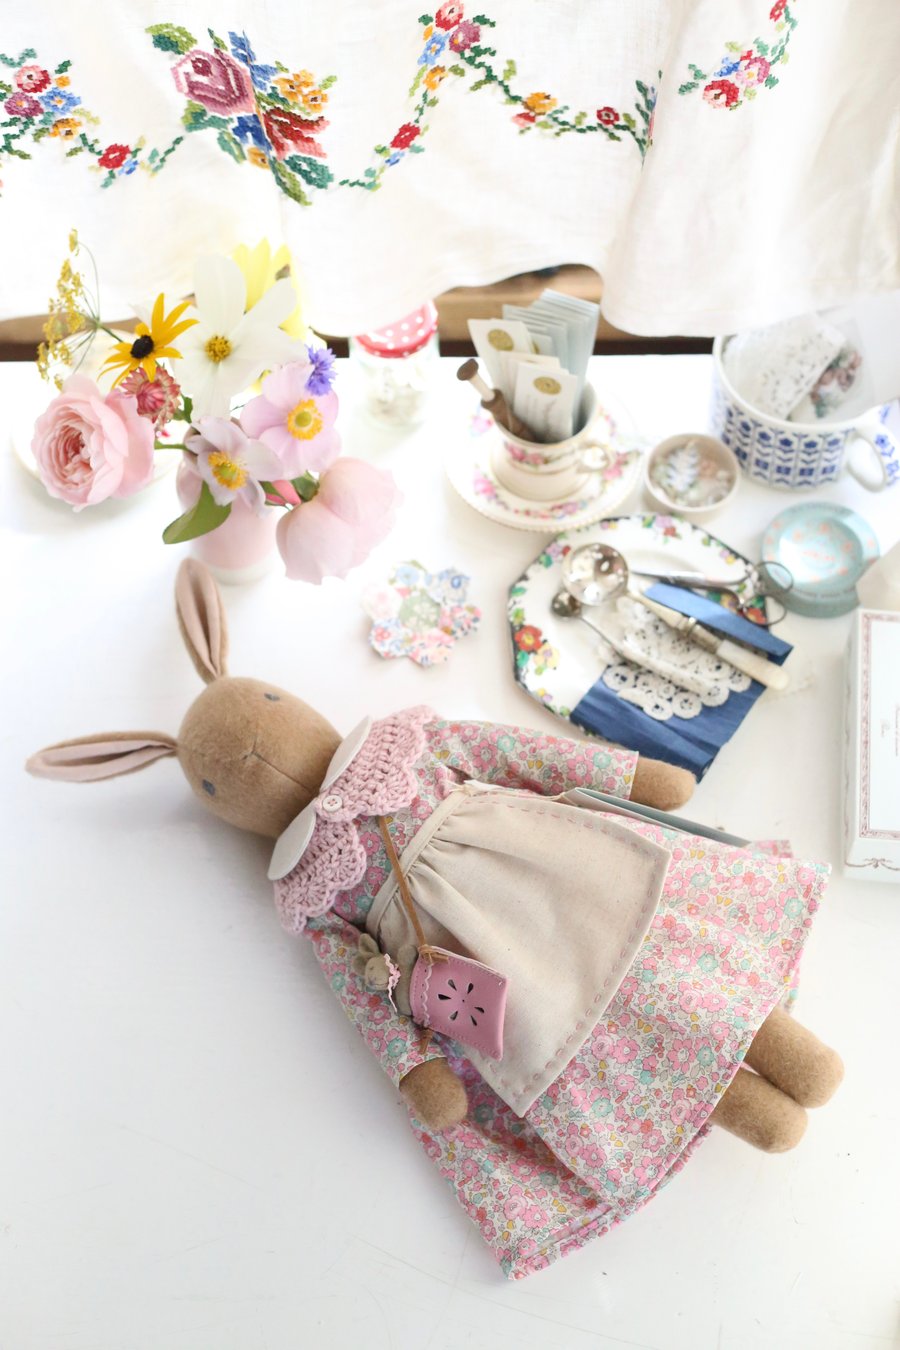 Heirloom Liberty Bunny - Large size Betsy Ann pale pink